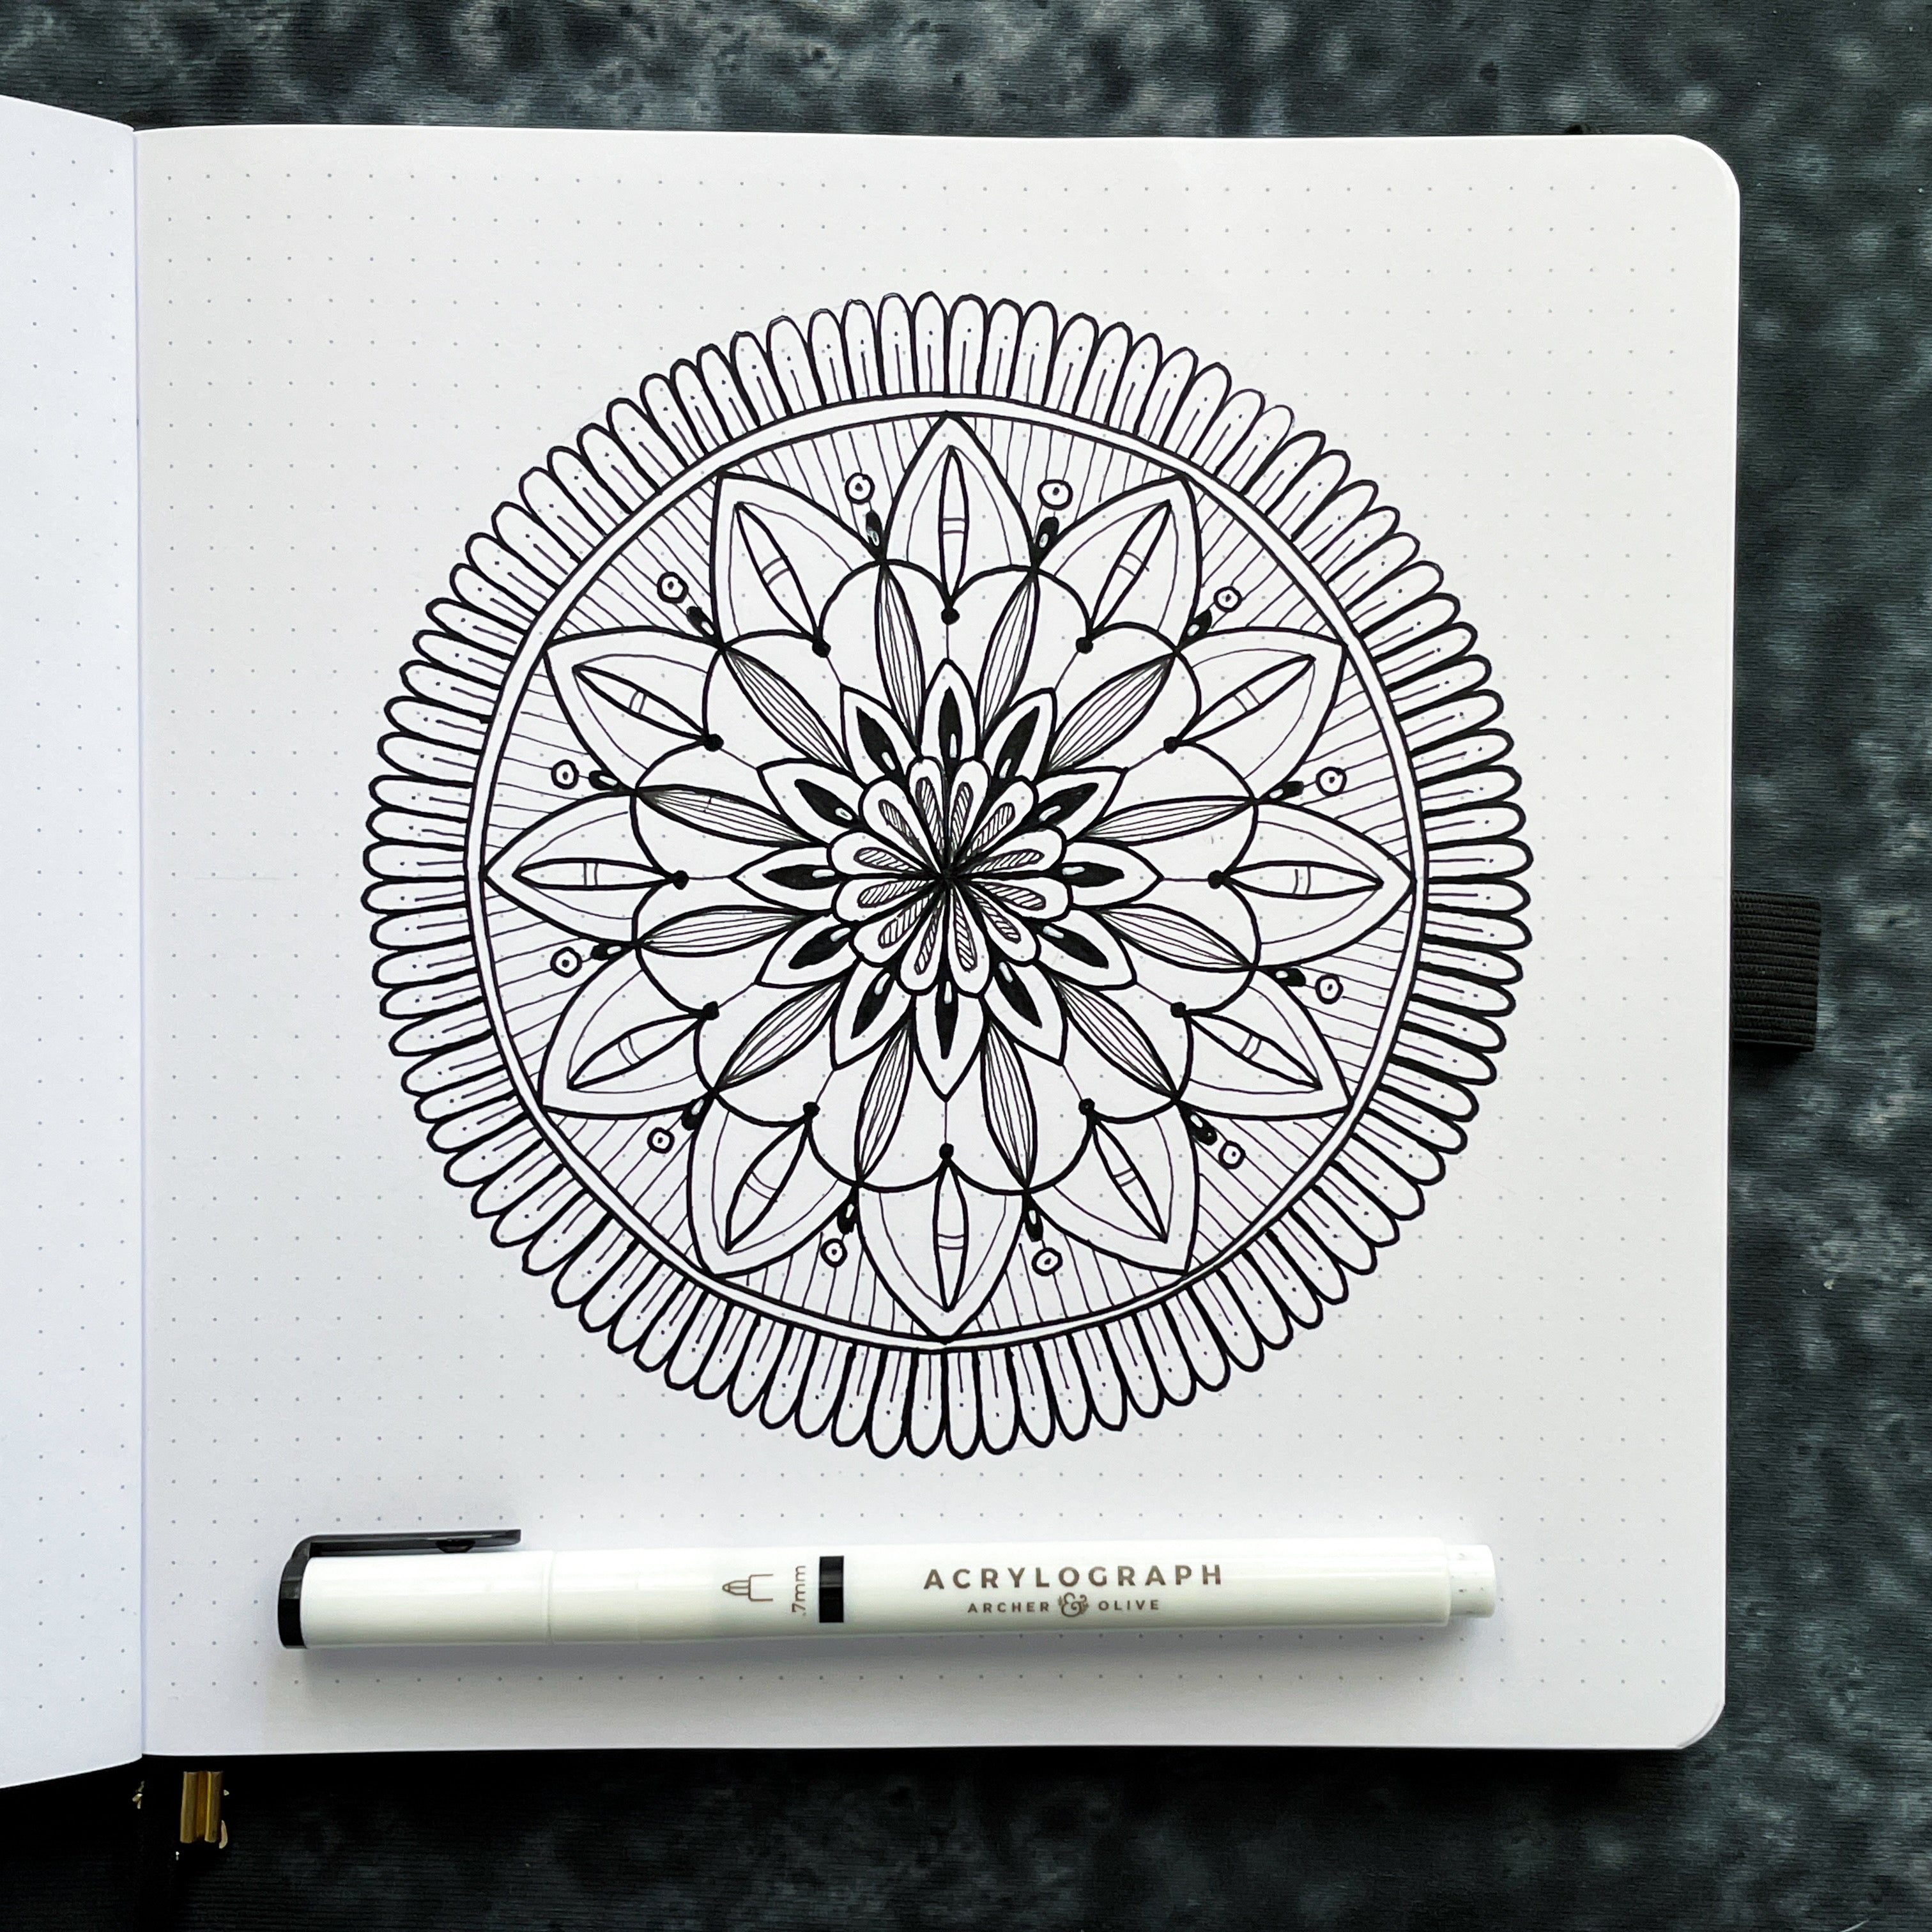 How to Draw a Mandala  Step by Step Tutorial for Beginners